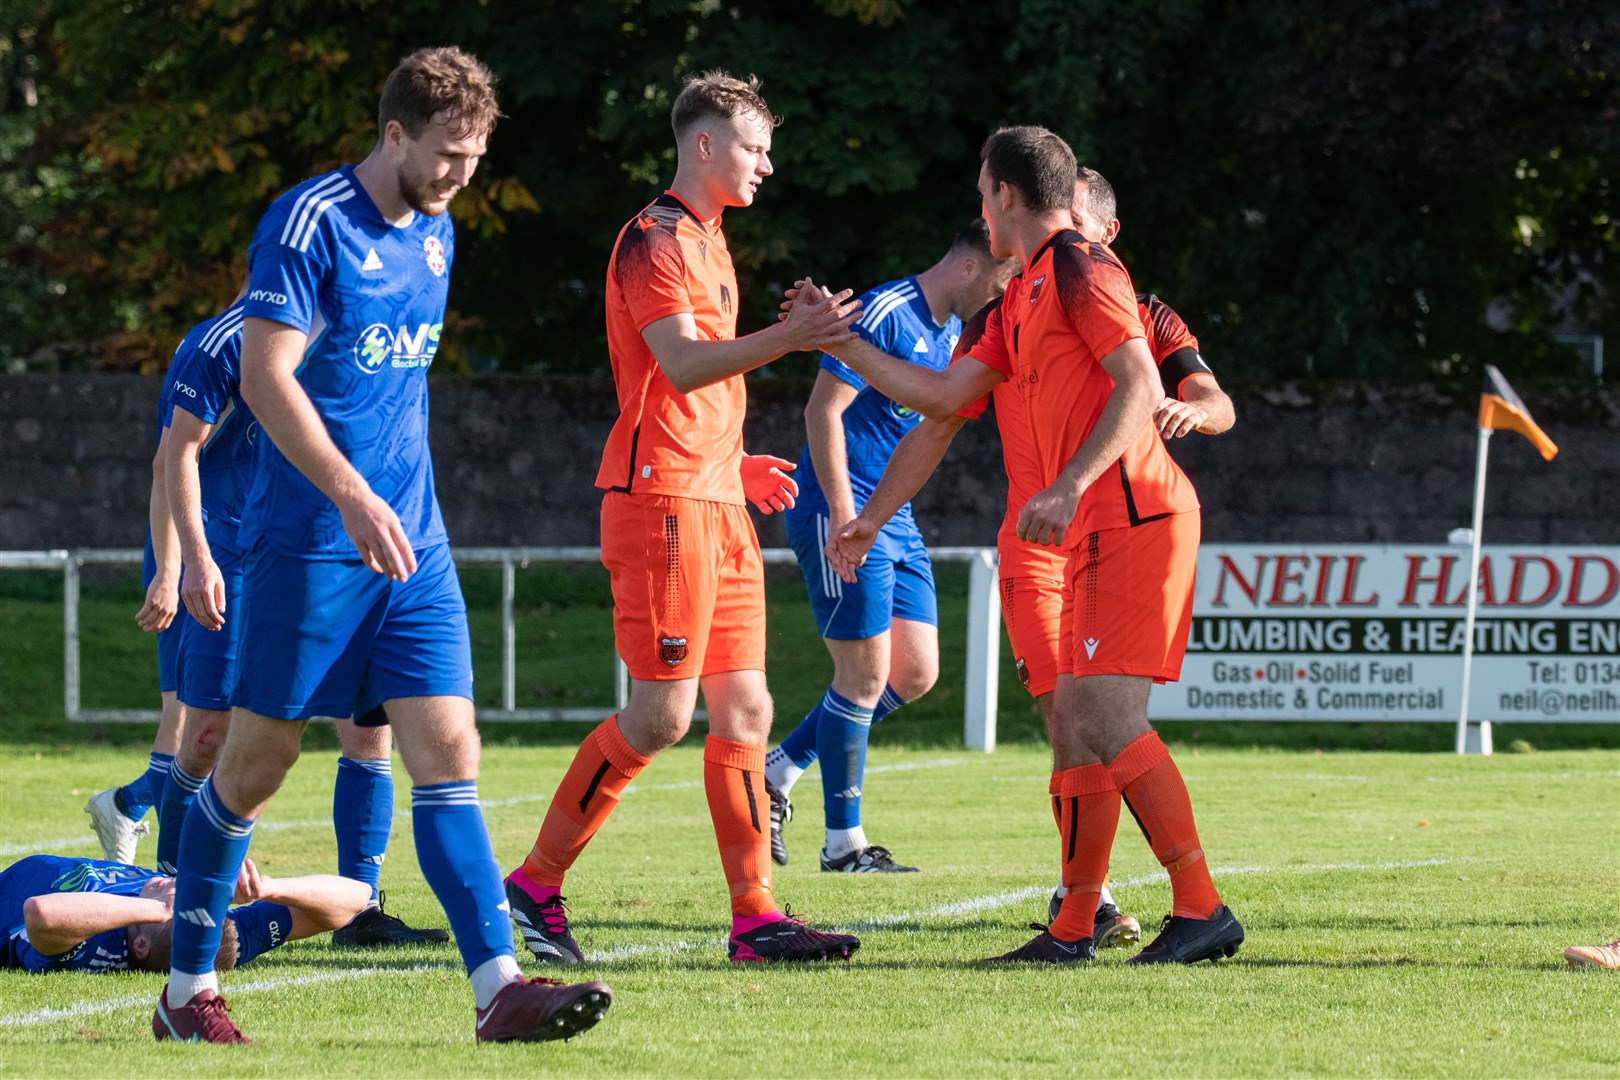 Rothes' Ben Johnstone (left) after his goal. ..Rothes FC (1) vs Lossiemouth FC (0) - Highland Football League 23/24 - Mackessack Park, Rothes 16/09/2023...Picture: Daniel Forsyth..